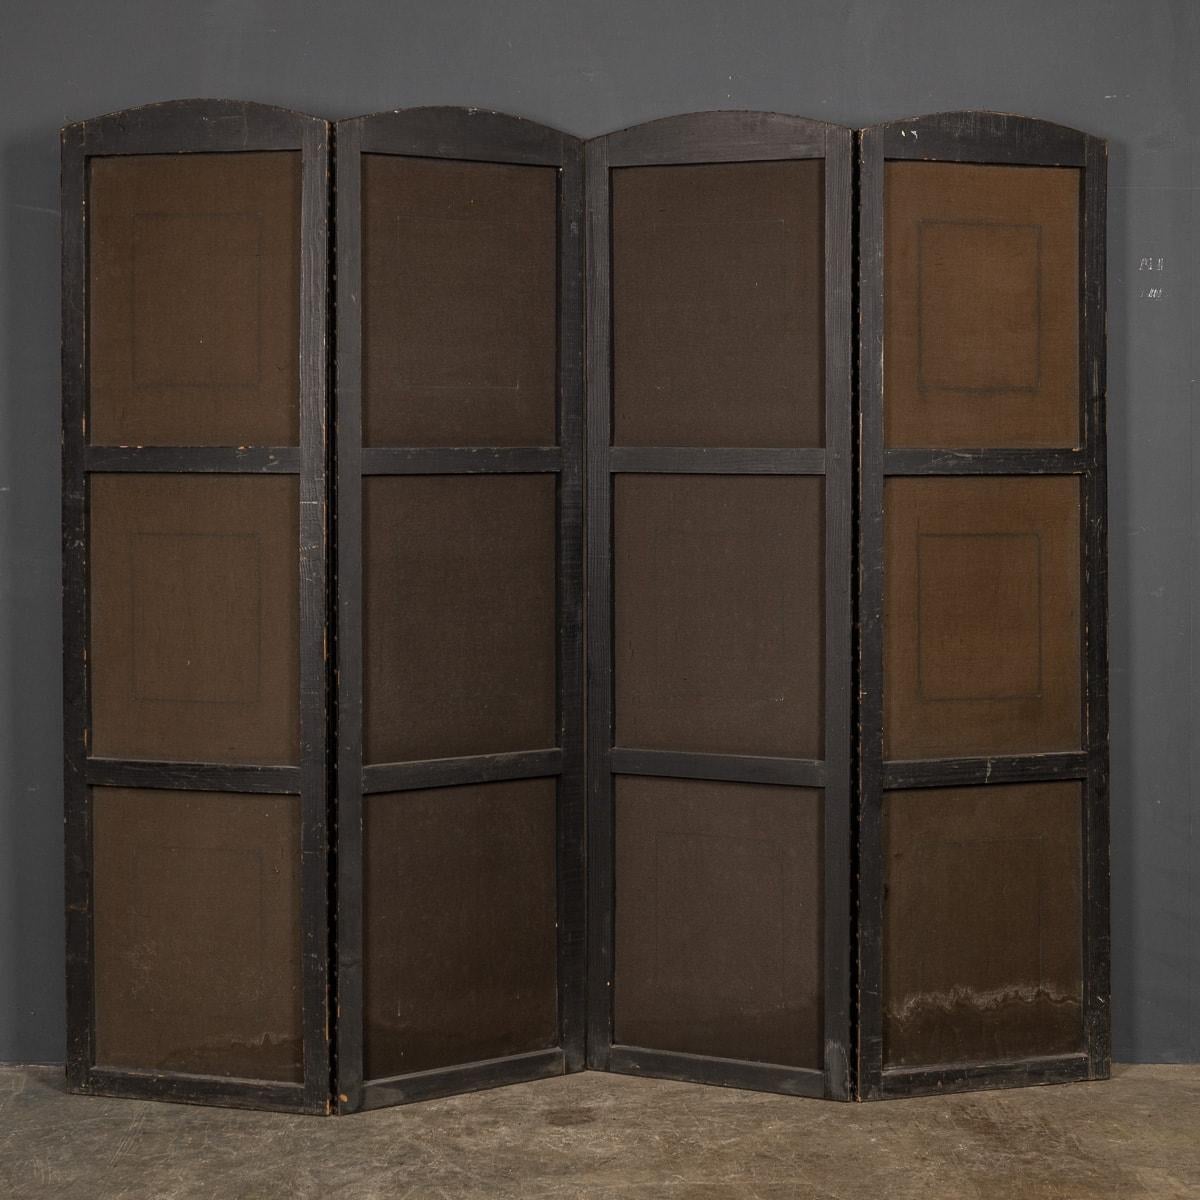 European 20th Century Oil Painted On Leather Room Screen, c.1920 For Sale